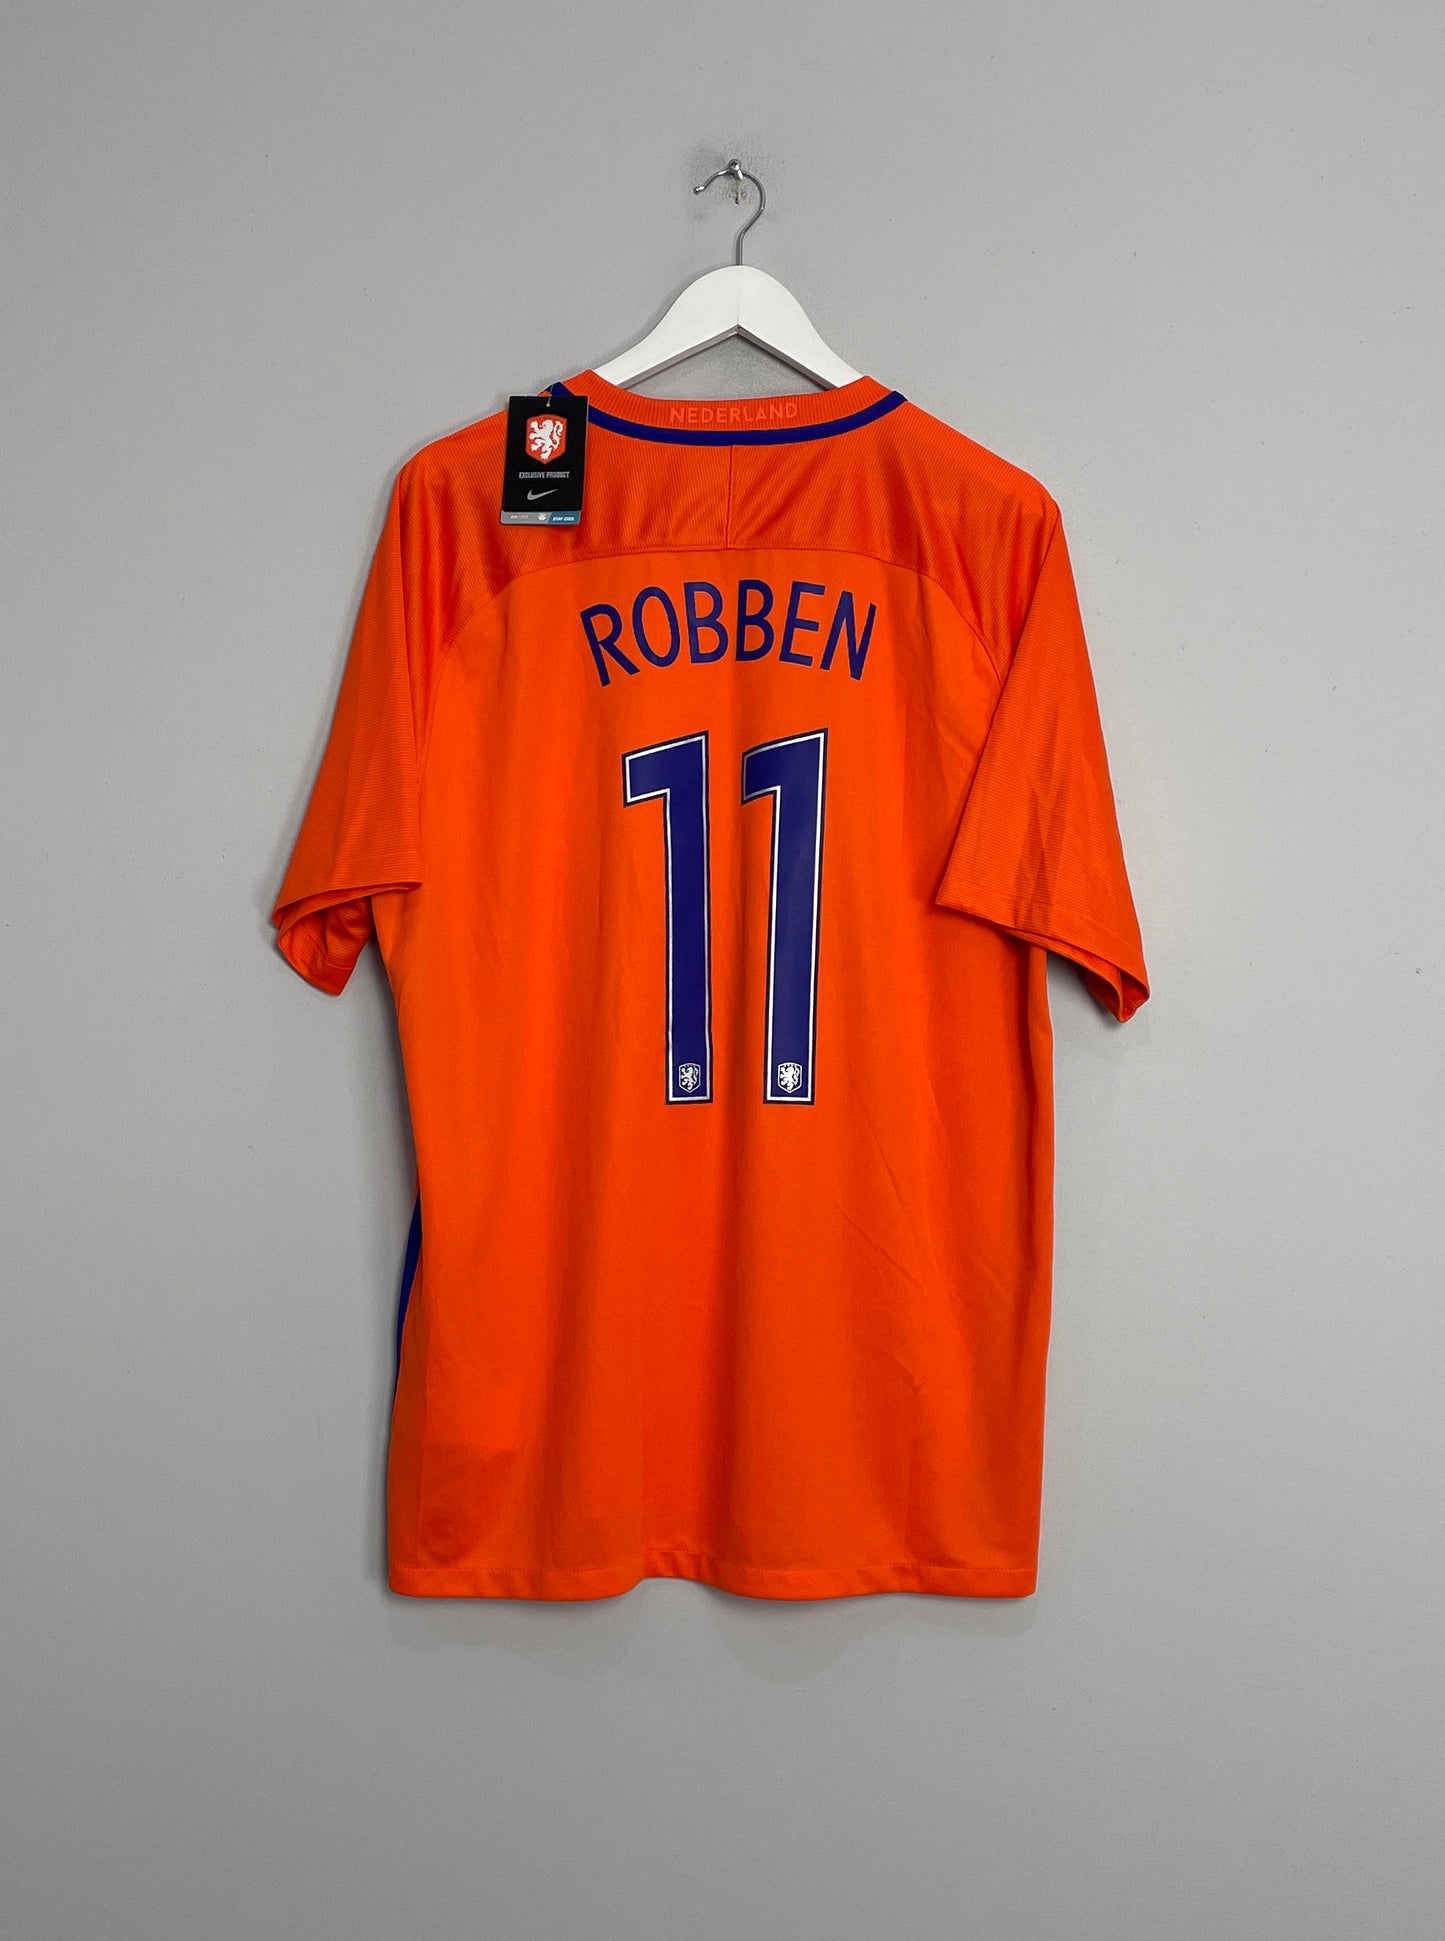 Image of the Netherlands Robben shirt from the 2016/17 season